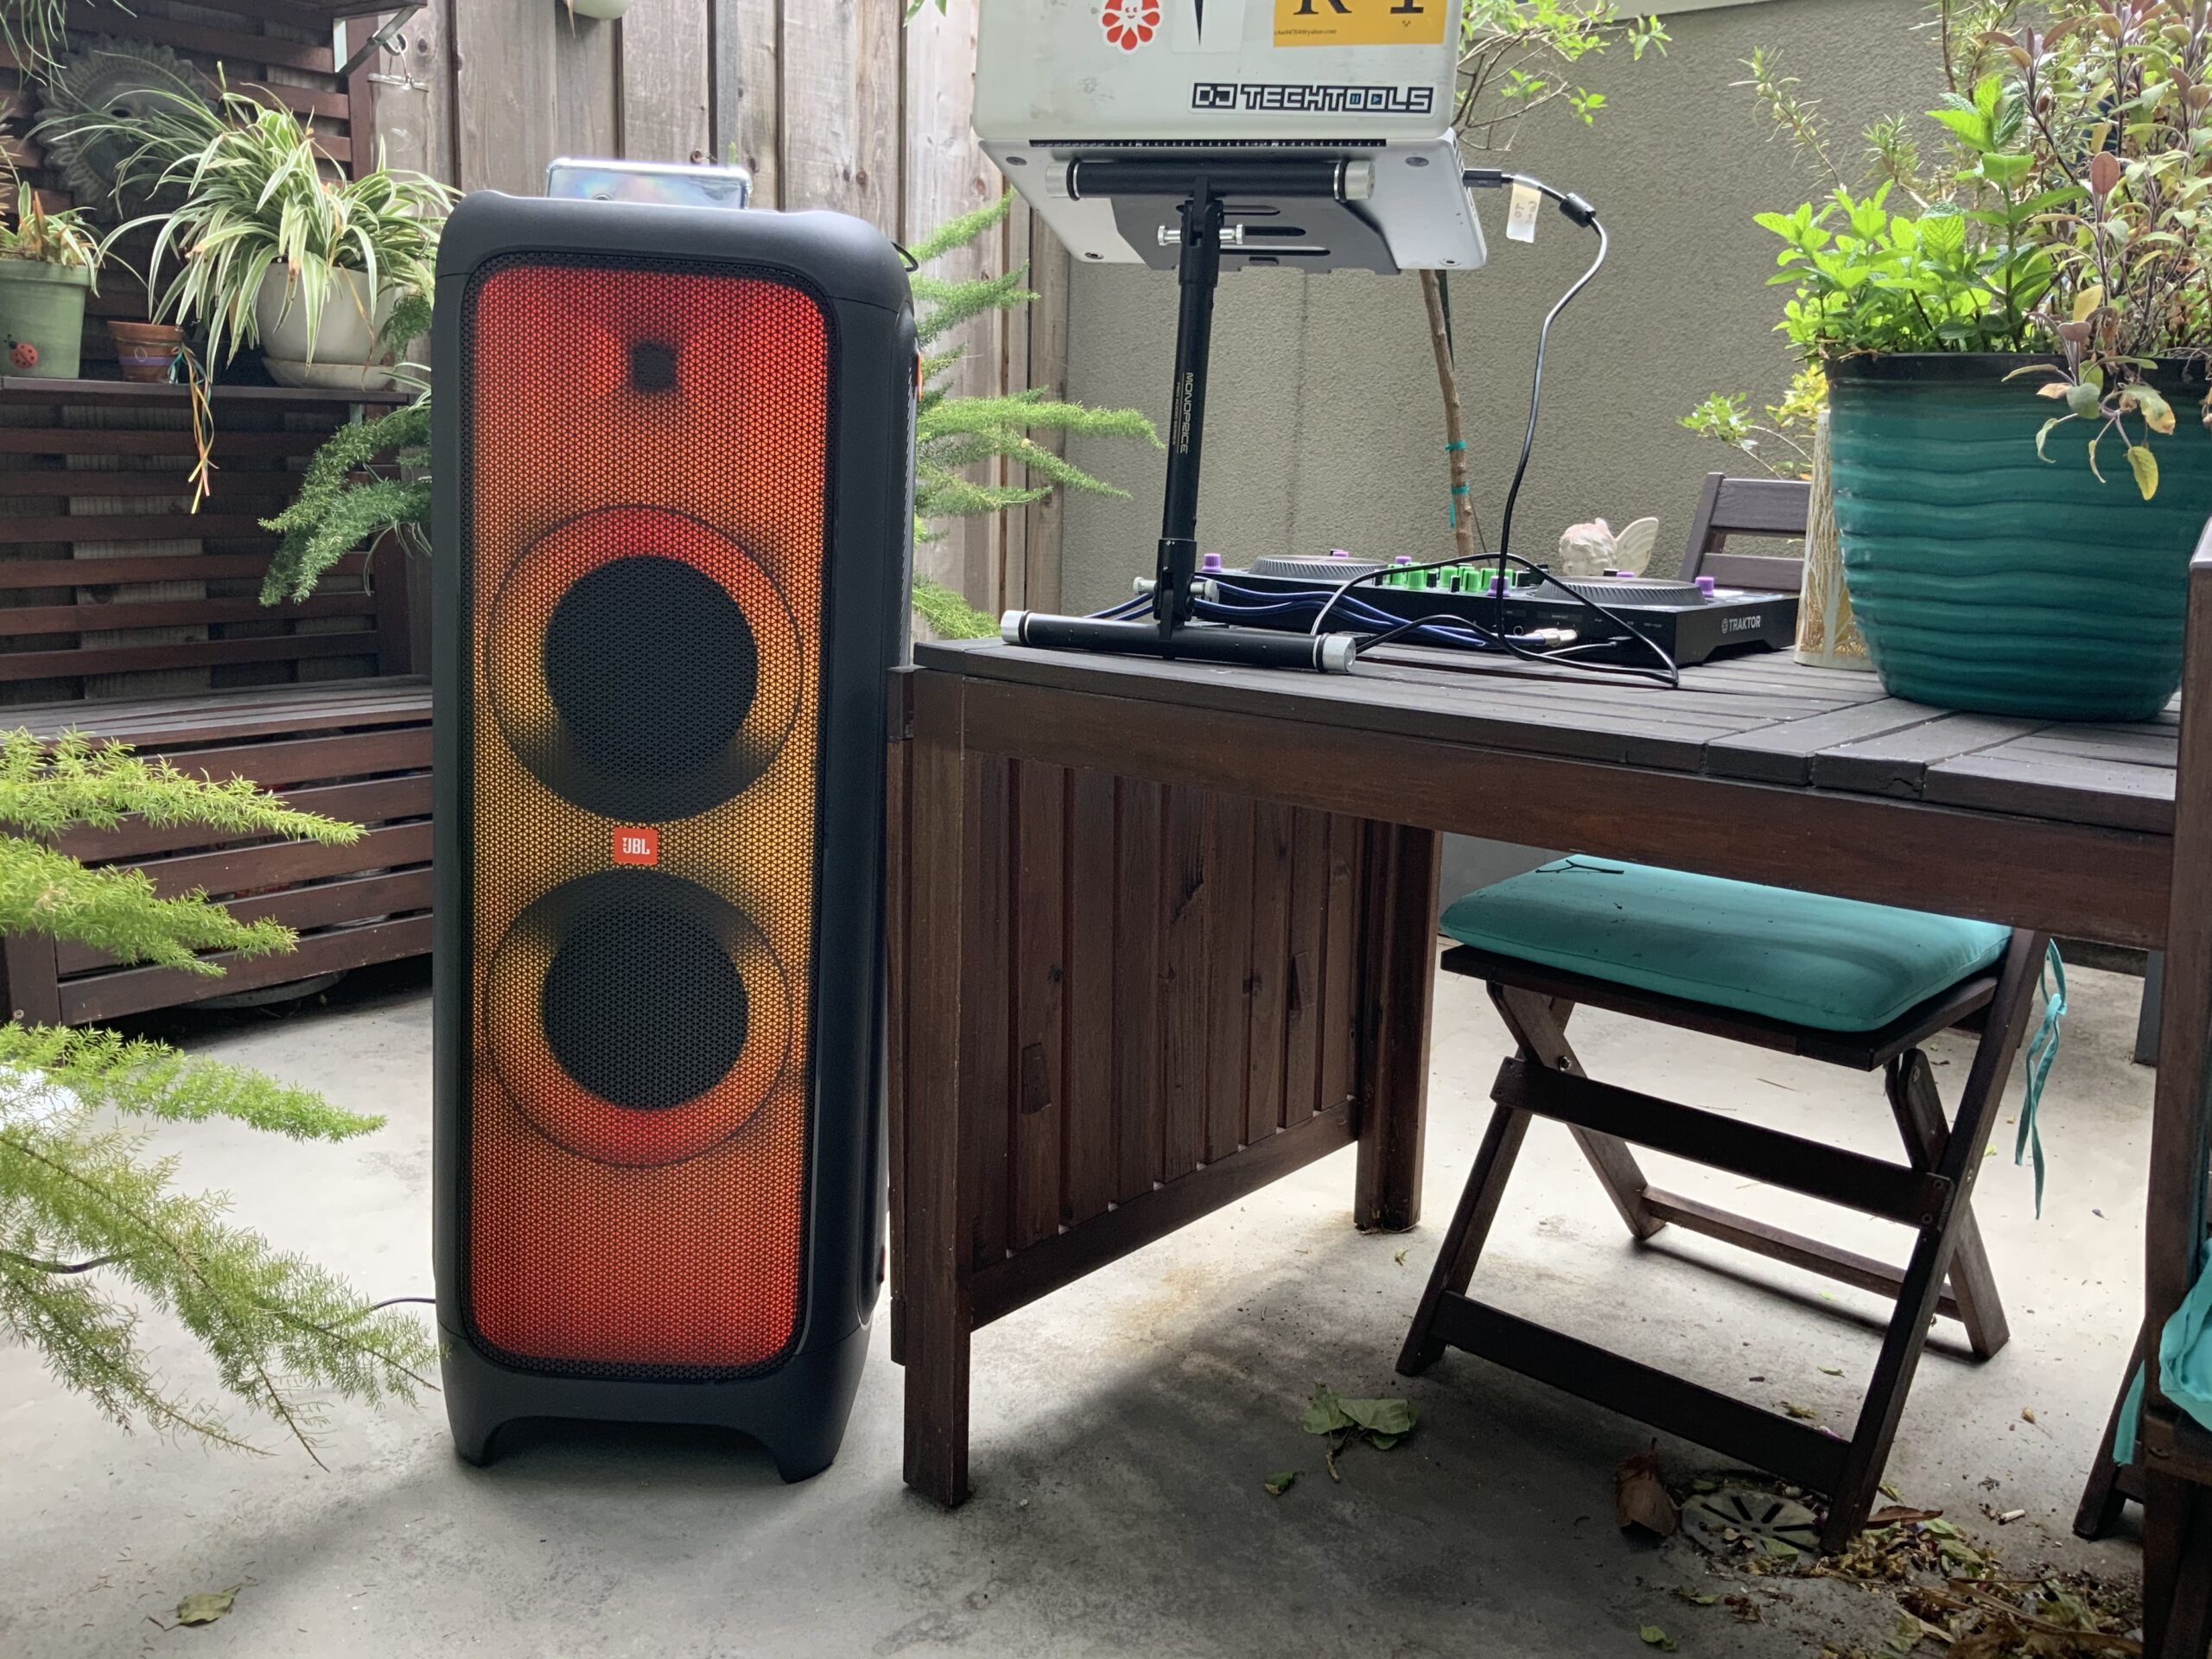 JBL PartyBox On-The-Go review: A fun and excellent outdoor portable party  speaker